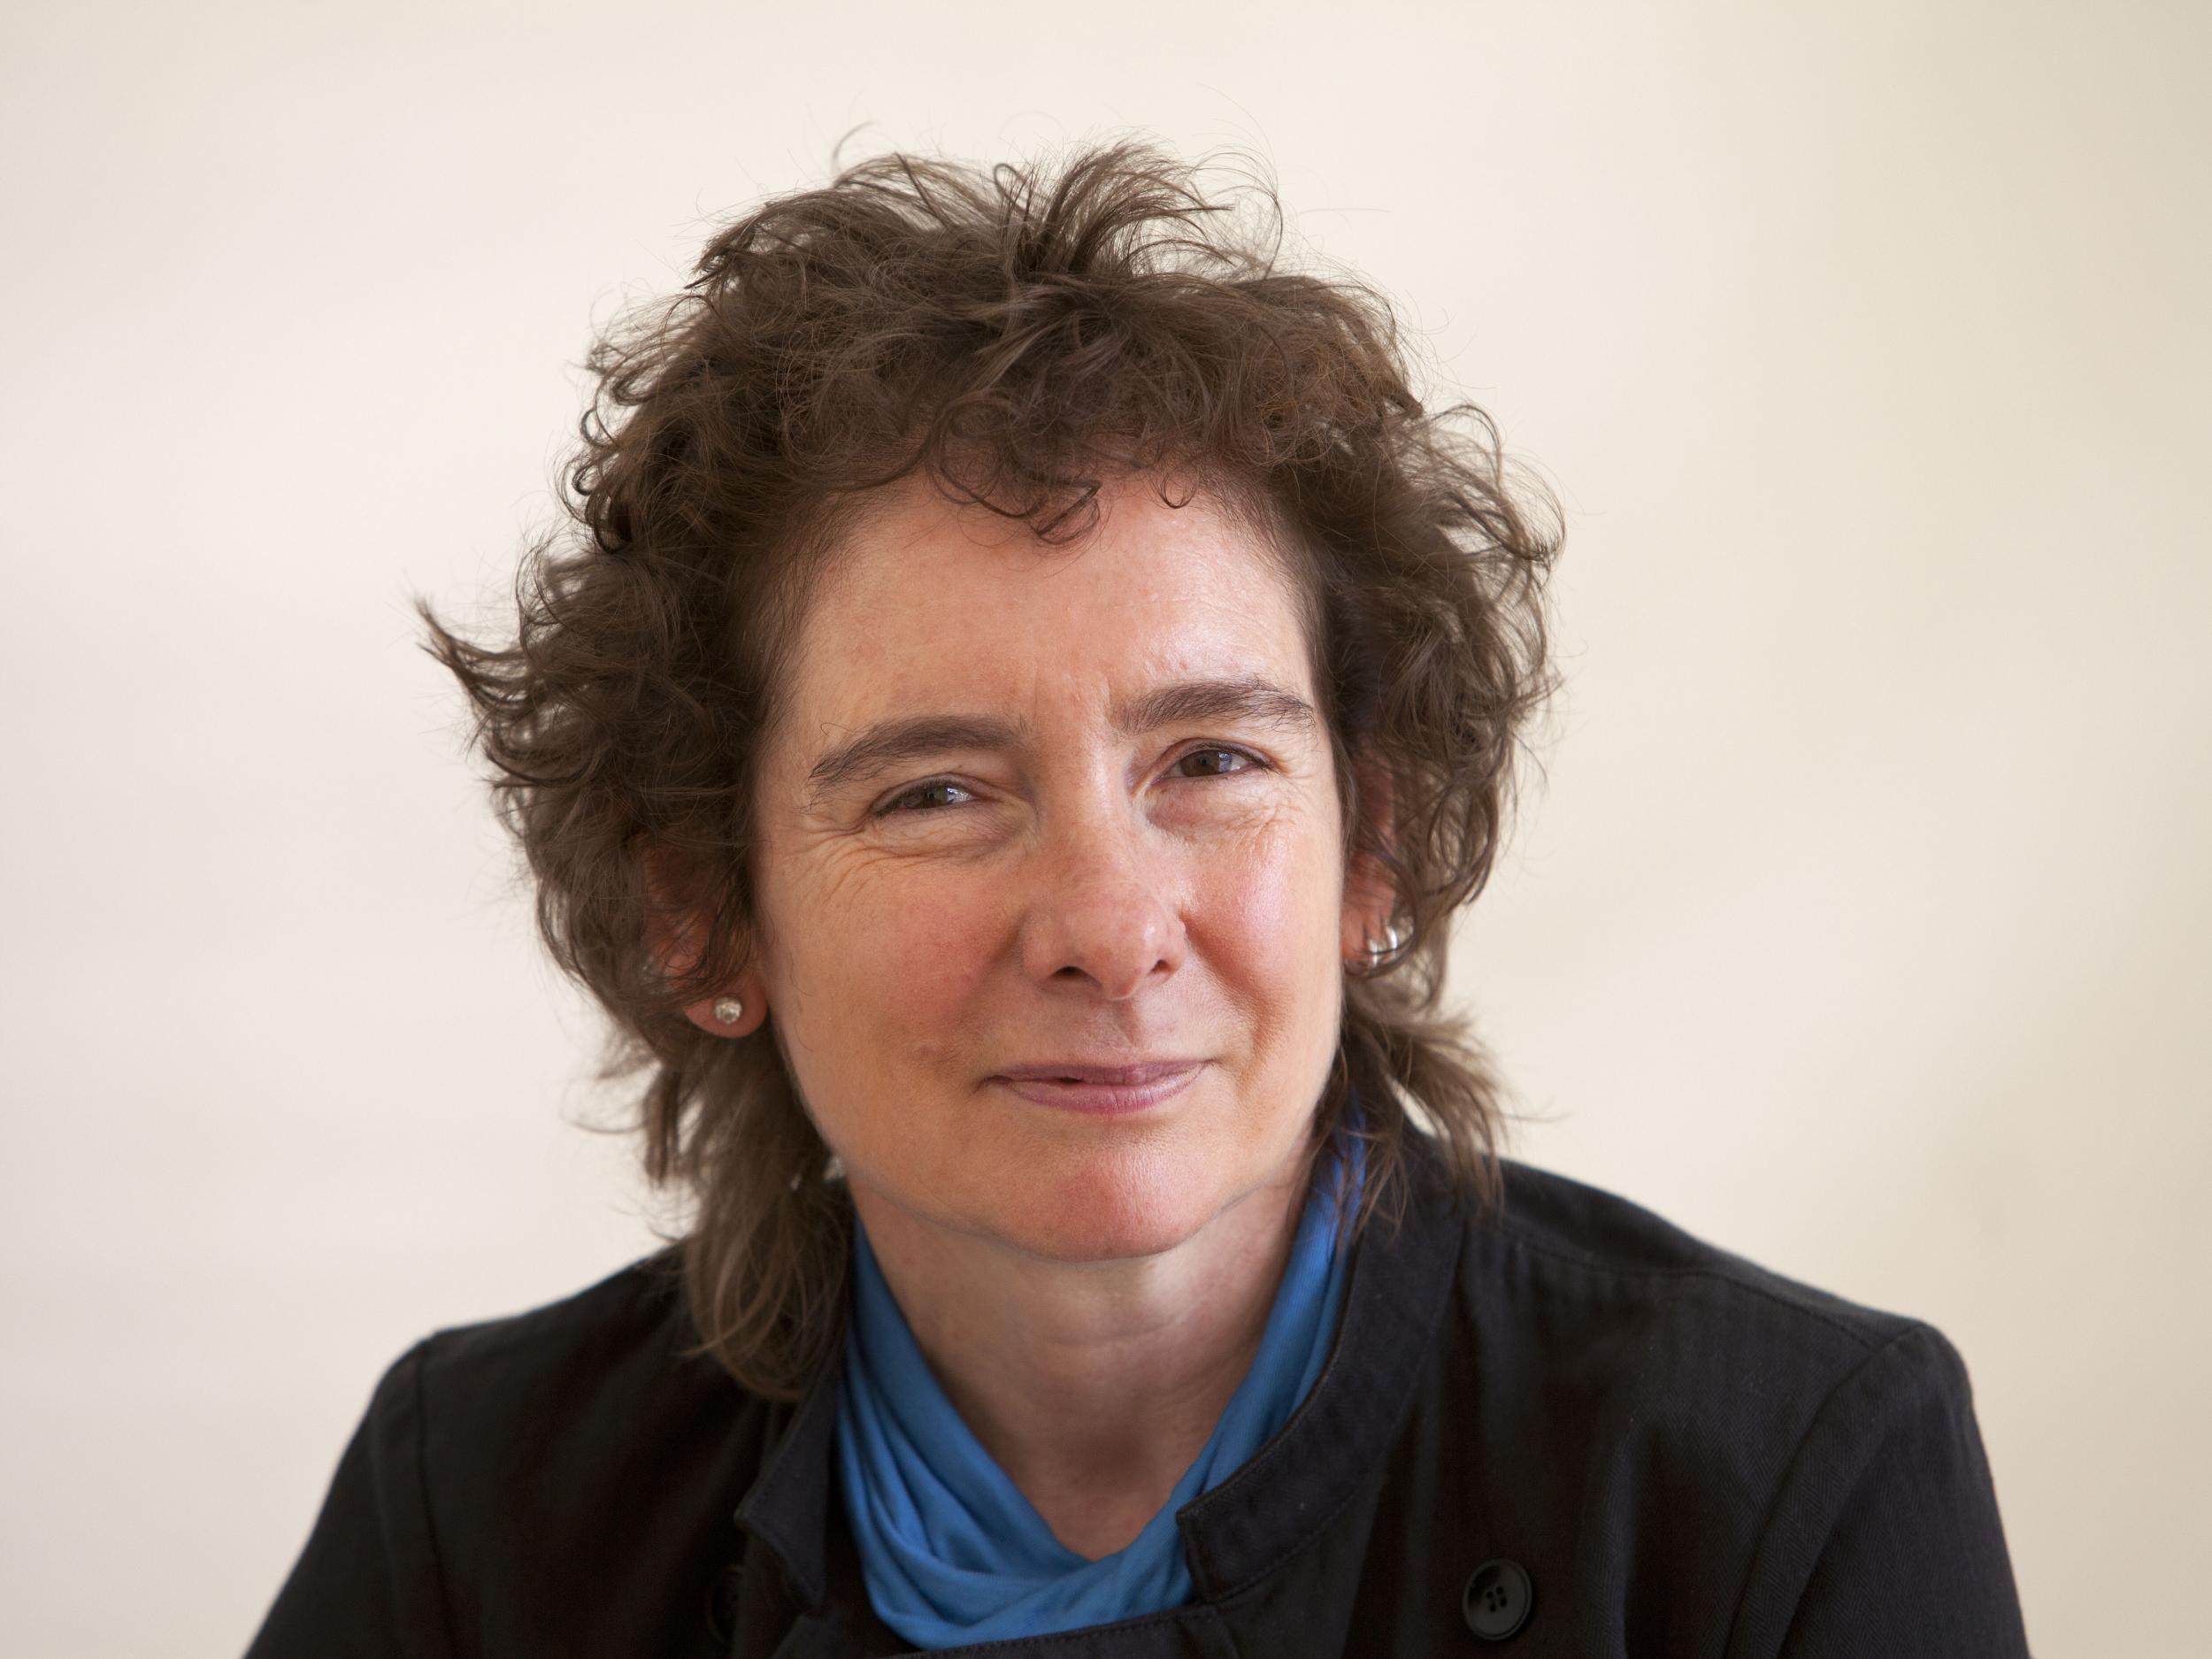 Writer Jeanette Winterson took her critics on more than once